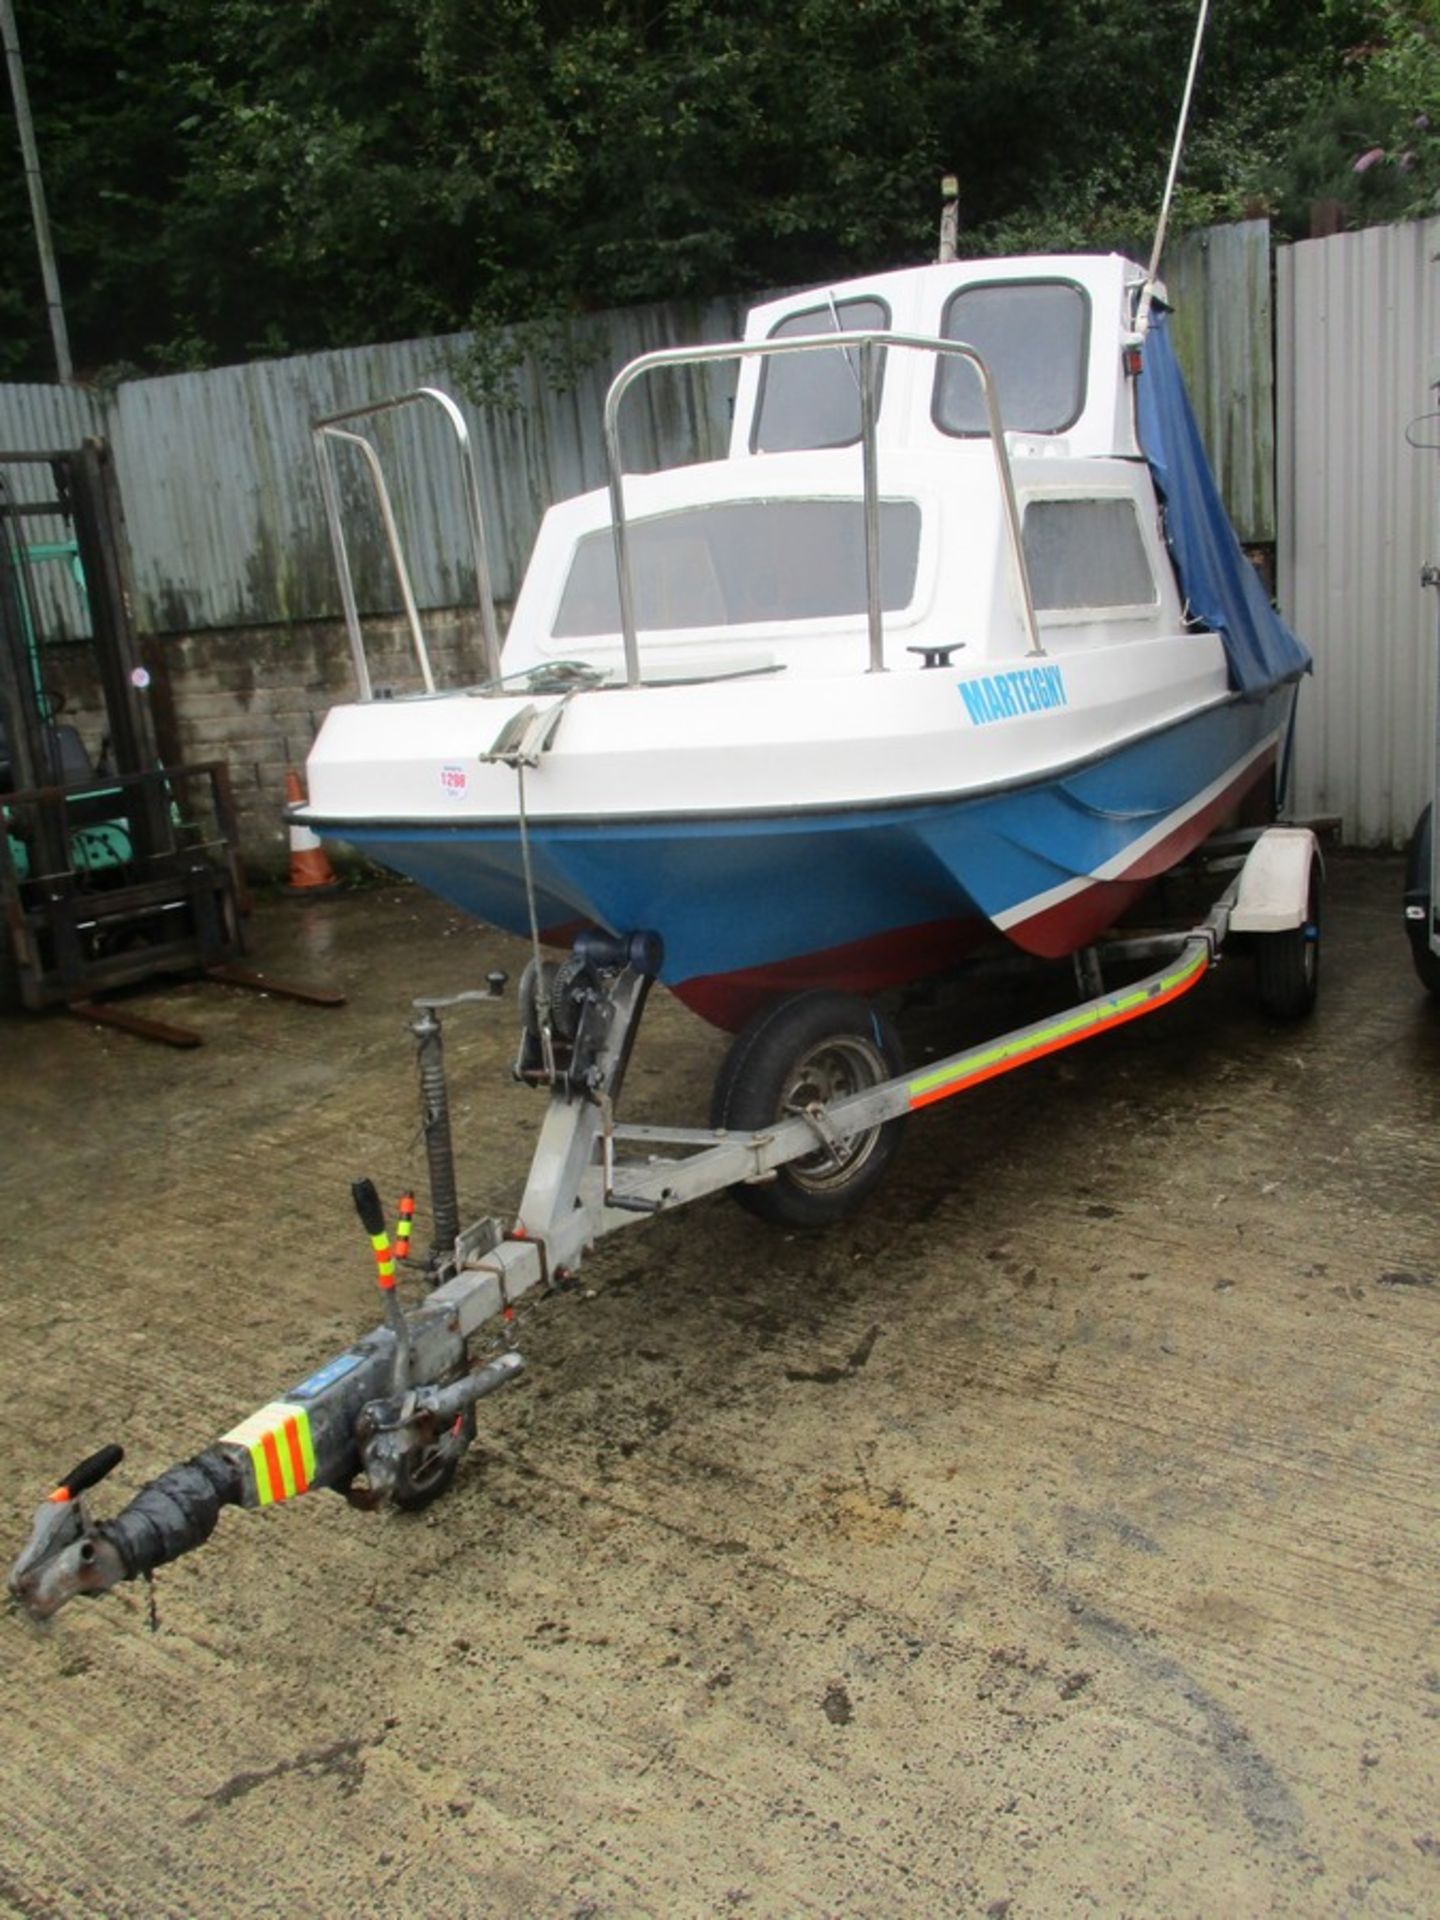 WILSON FLYER 17FT FISHER C/W 2014 MARINER 40HP 4 STROKE OUTBOARD ONLY DONE 30HRS, BRAKED TRAILER - Image 4 of 10